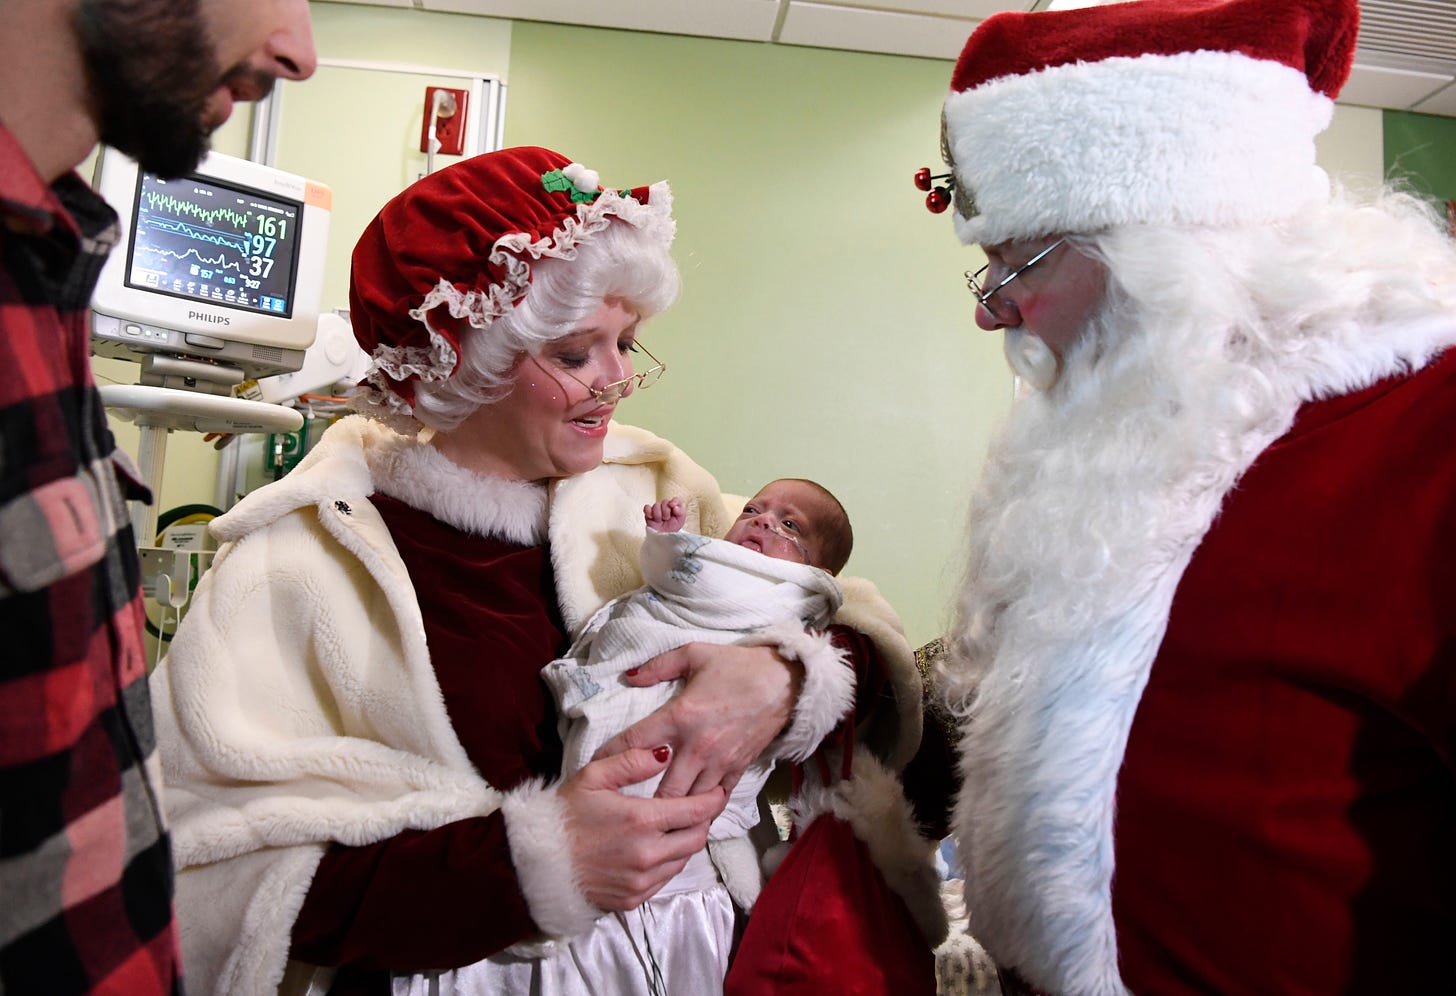 A man dressed as Santa Claus looks on as a woman dressed as Mrs. Claus holds a newborn baby in her arms.